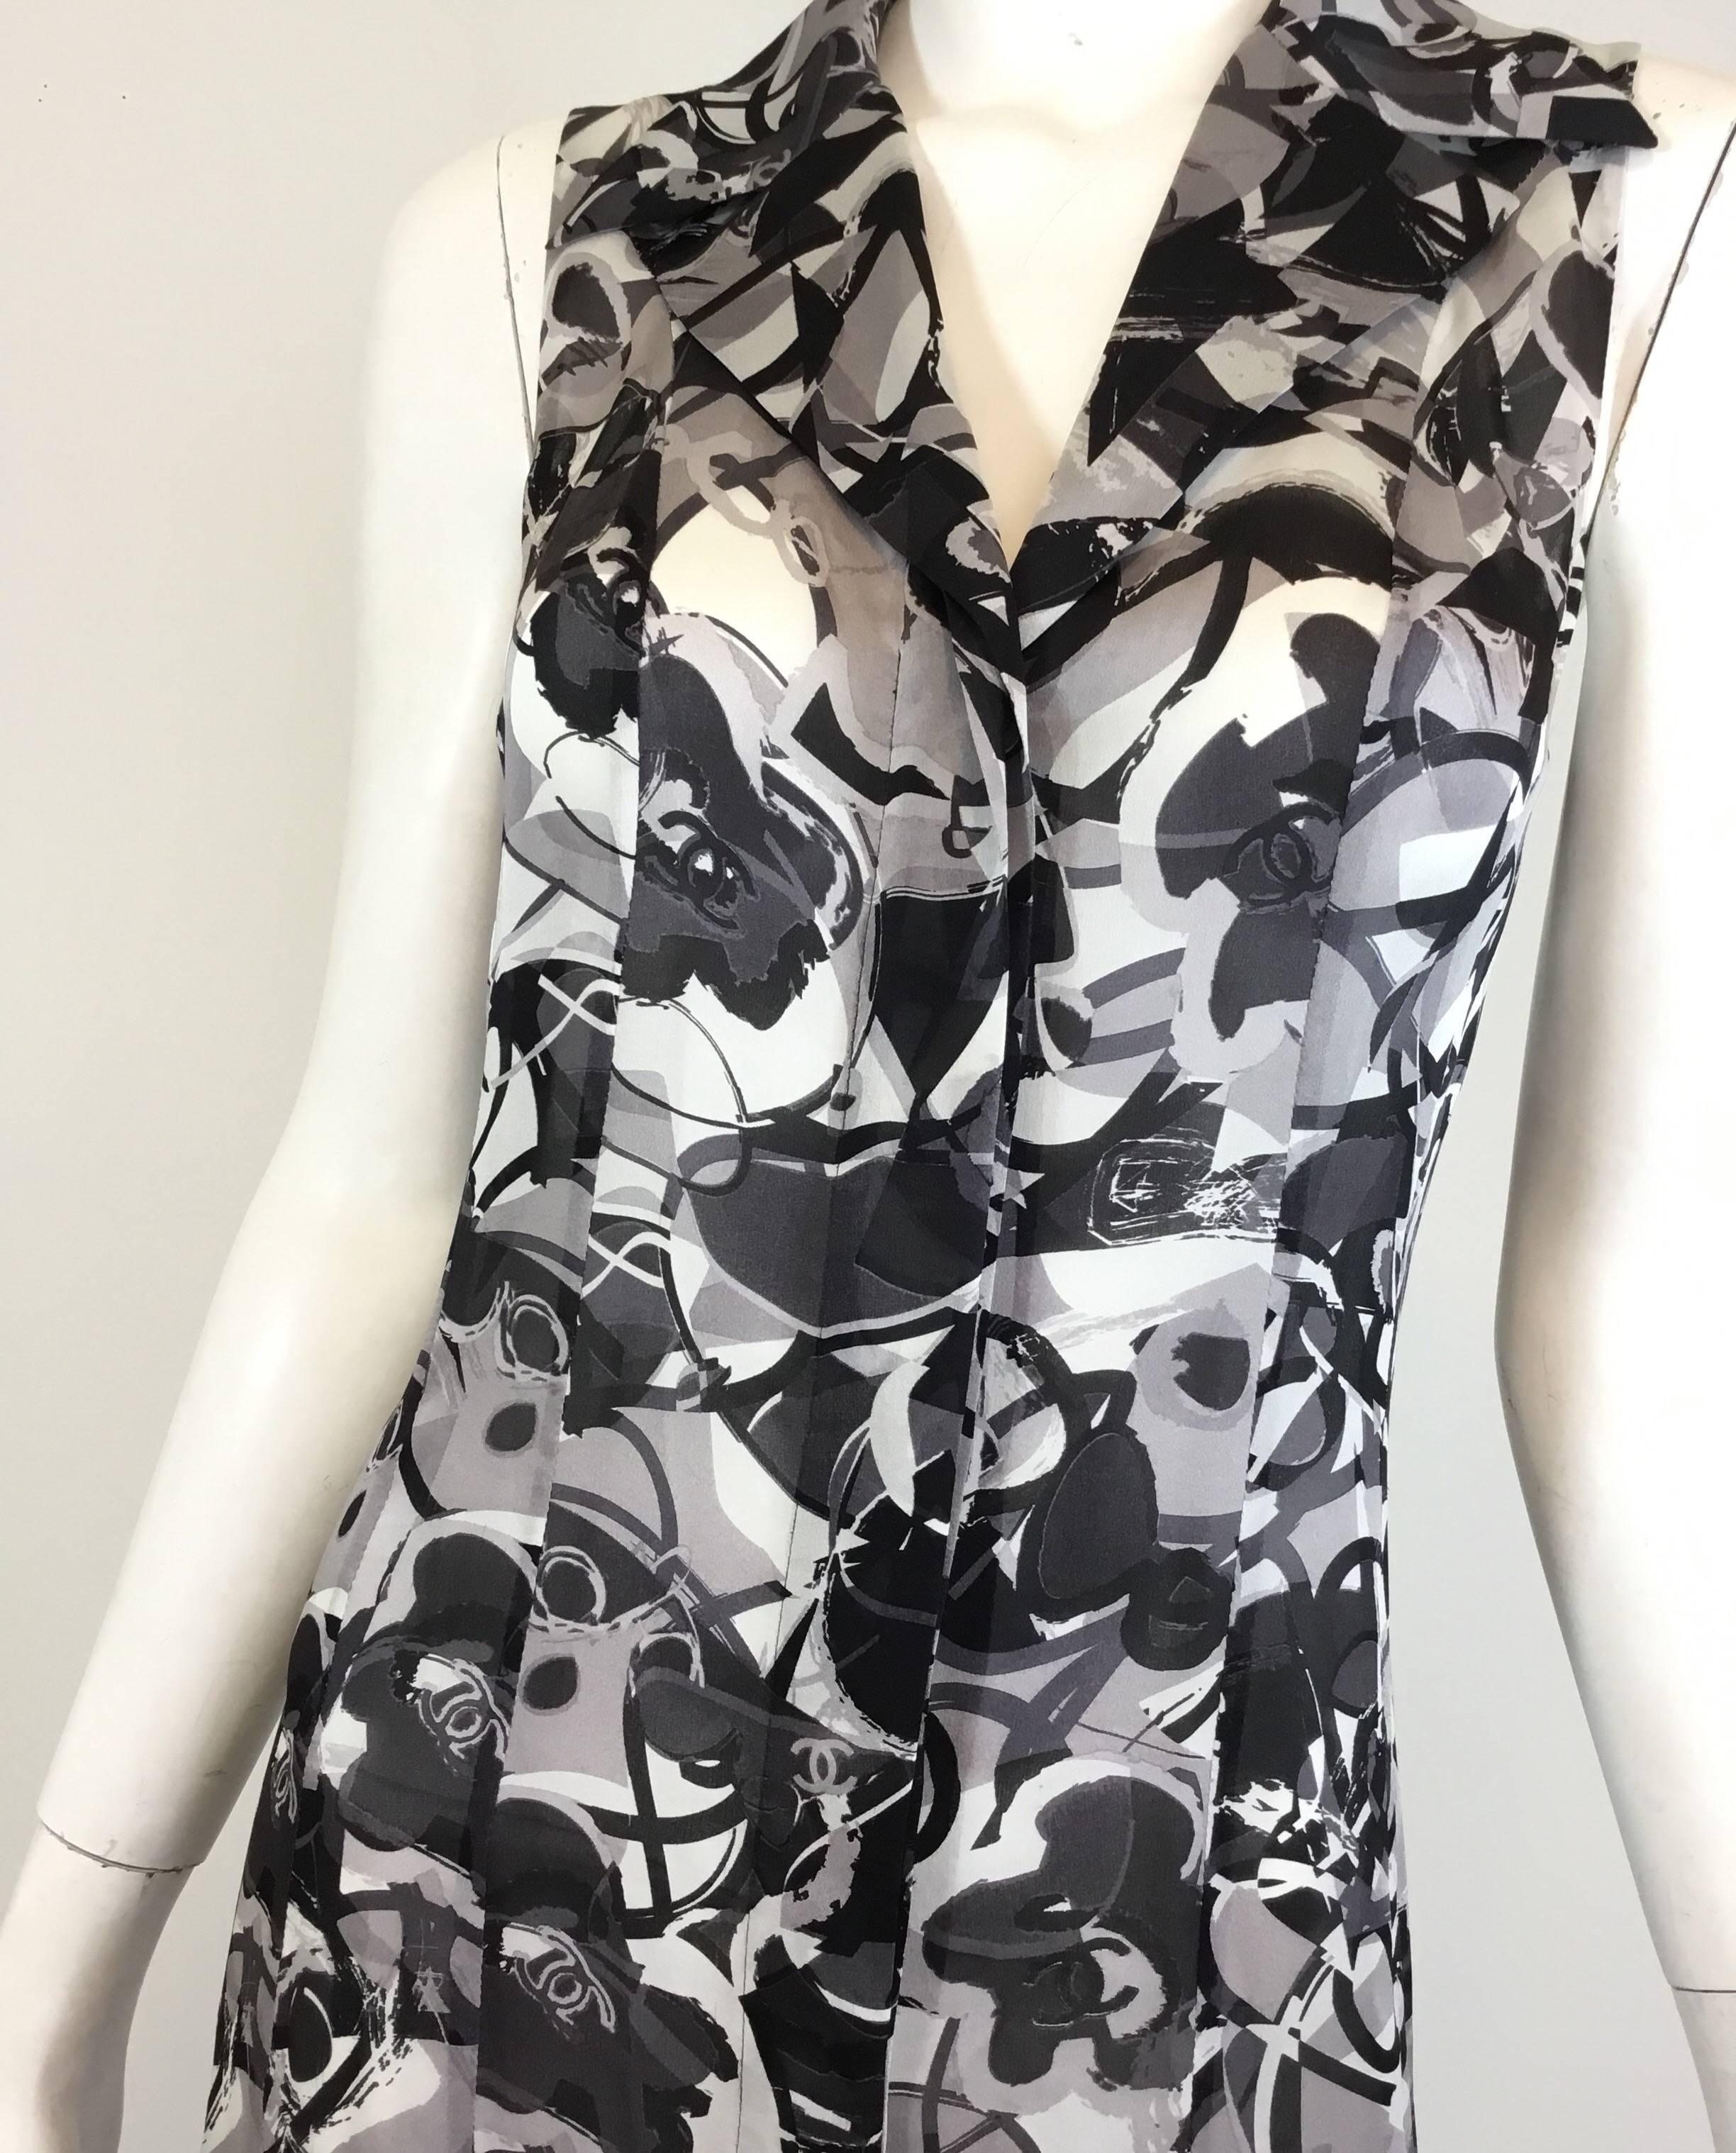 Chanel silk dress features a grey and black print throughout with concealed button front closures. Dress is labeled Size 38, made in France. Small spot at the front near left hip.

Bust 35”, waist 32”, hips 36”, length 41”